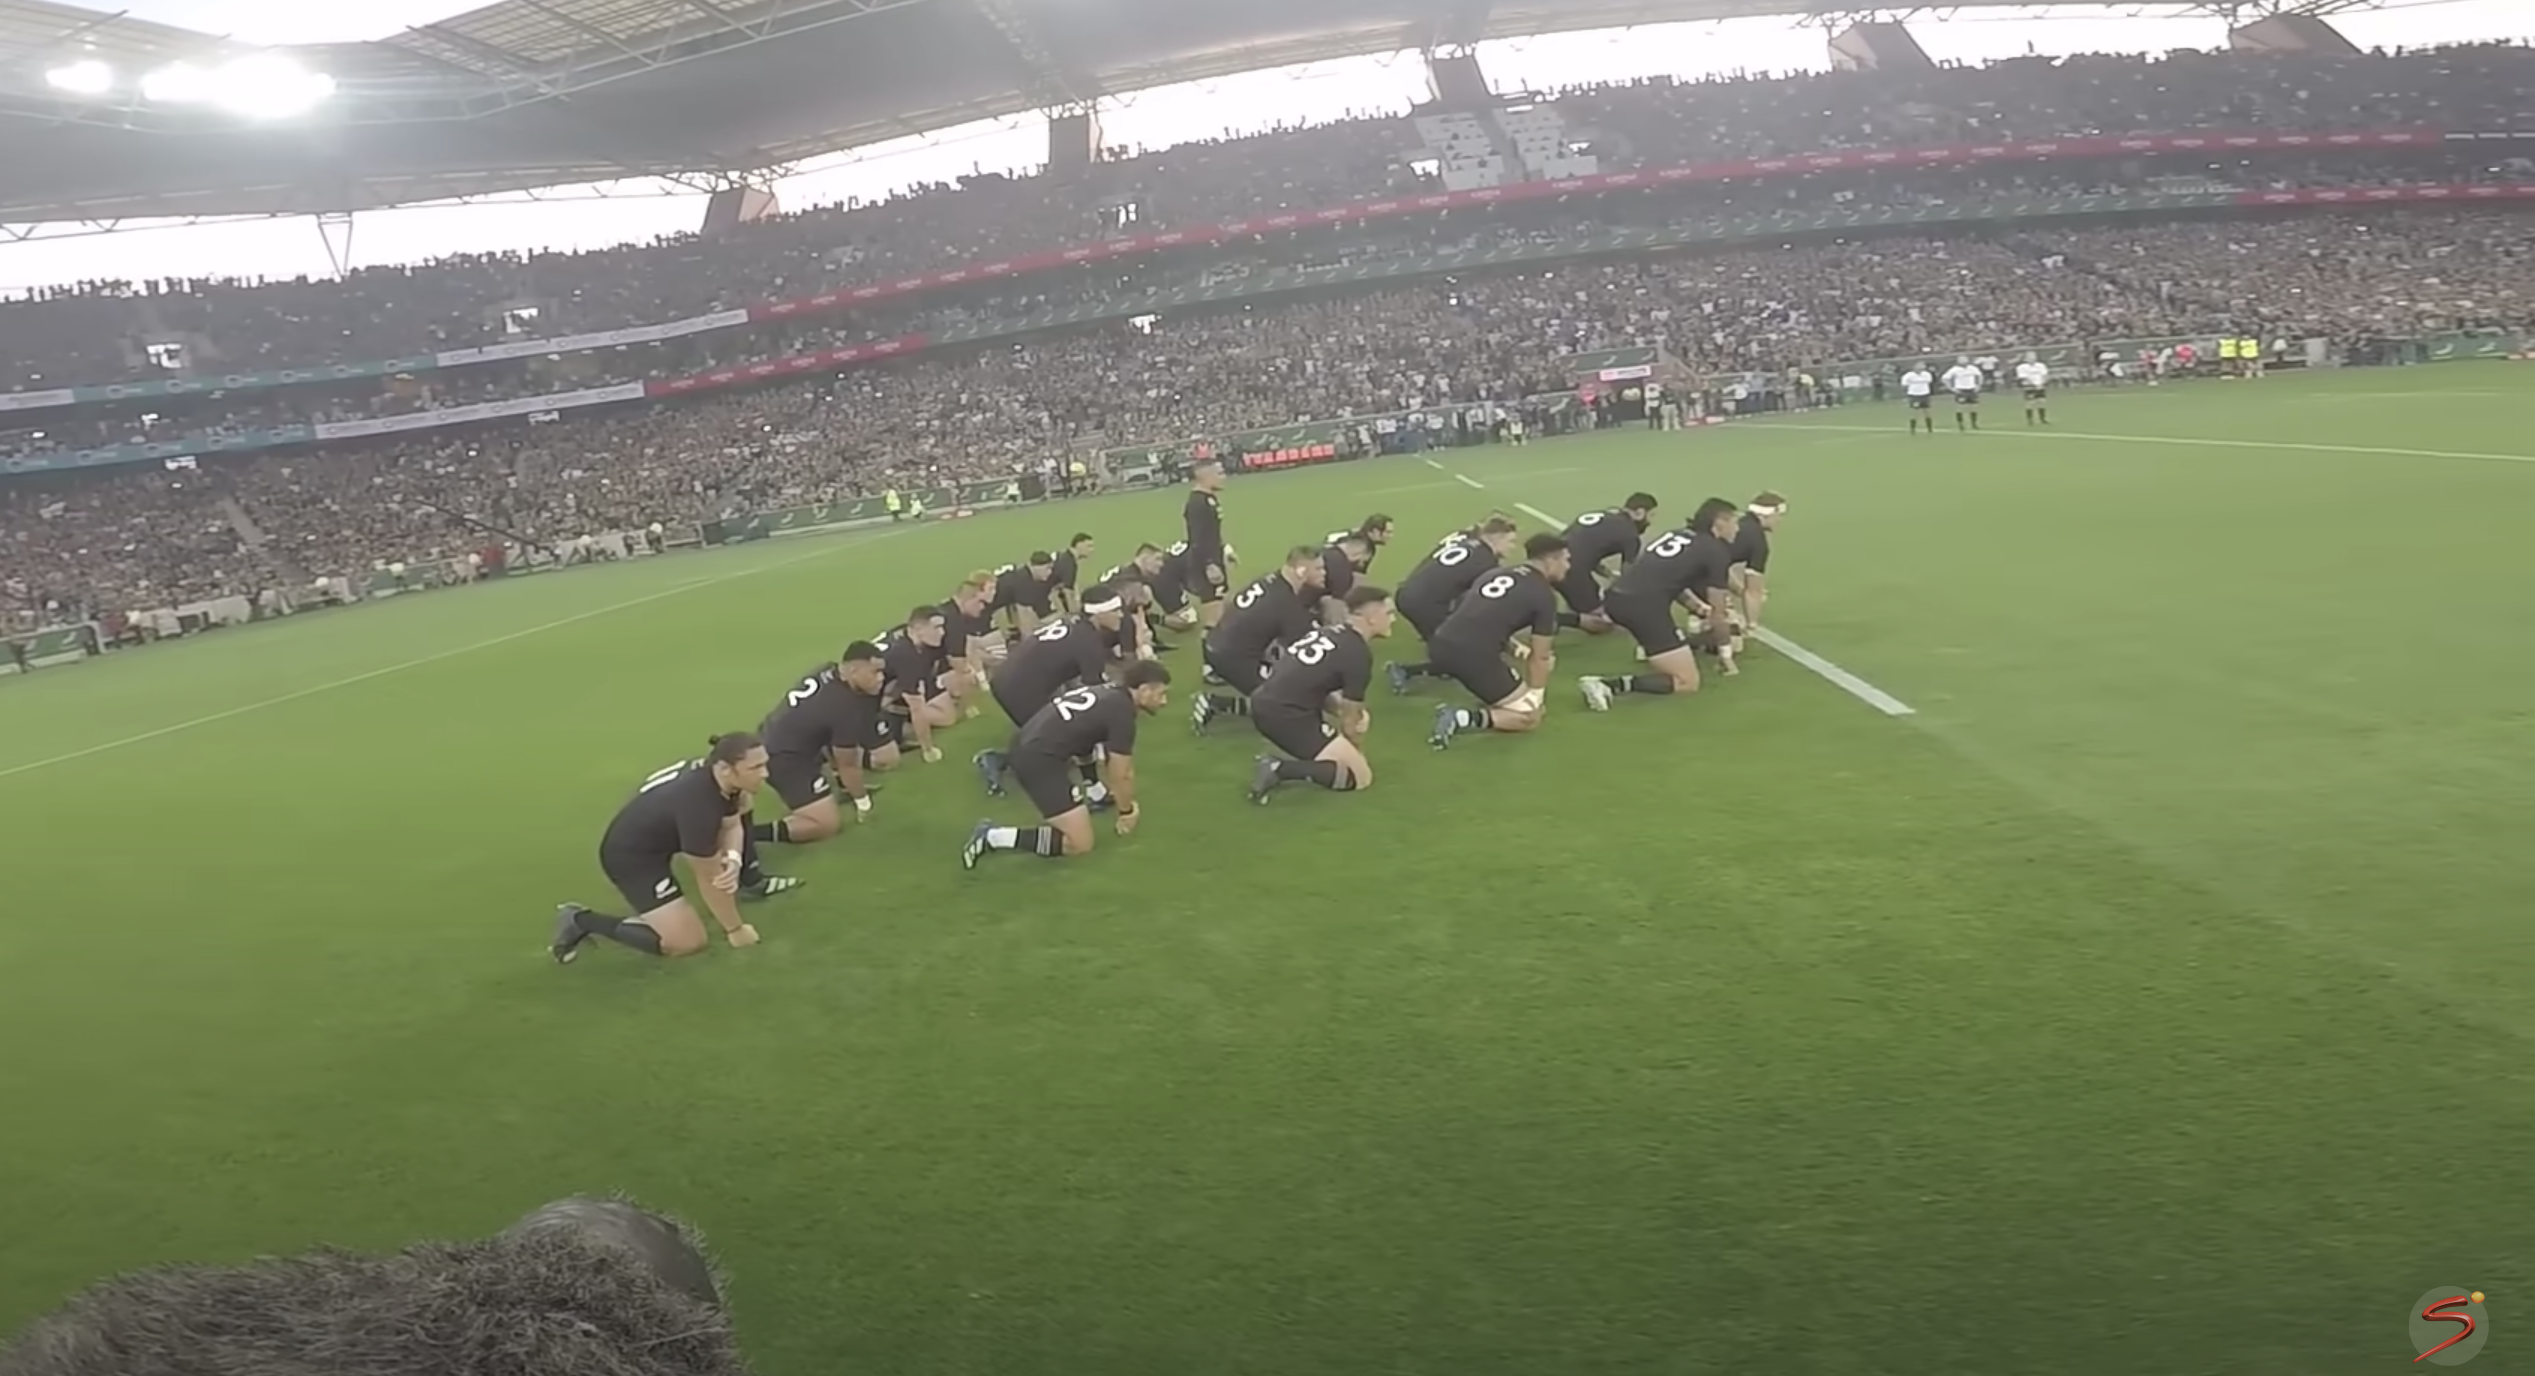 Unique view of the haka goes viral